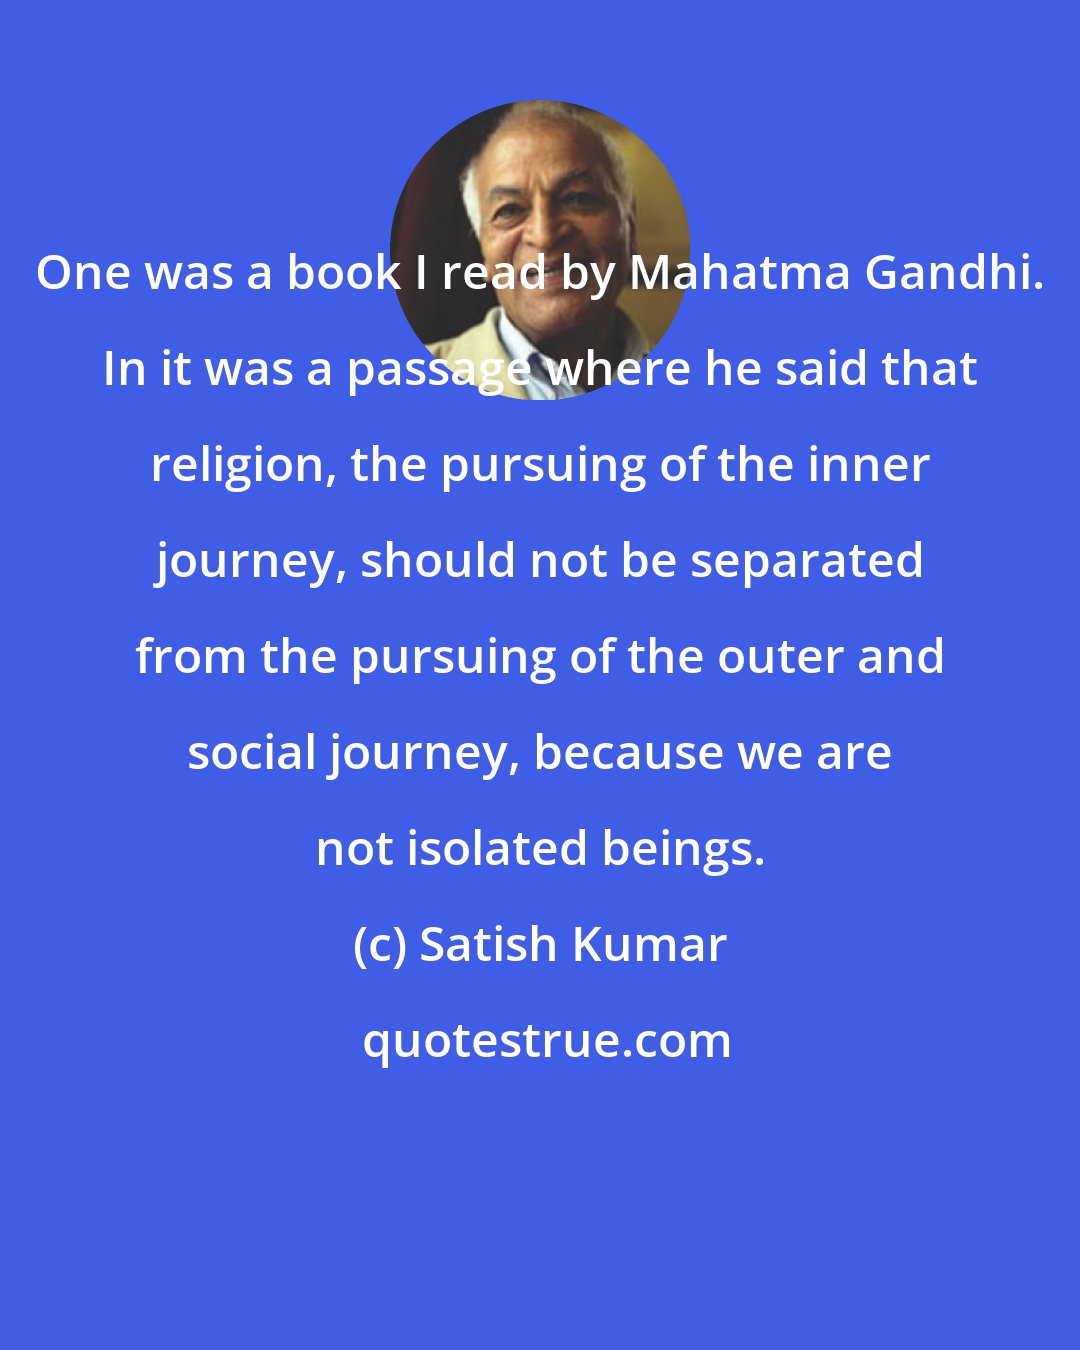 Satish Kumar: One was a book I read by Mahatma Gandhi. In it was a passage where he said that religion, the pursuing of the inner journey, should not be separated from the pursuing of the outer and social journey, because we are not isolated beings.